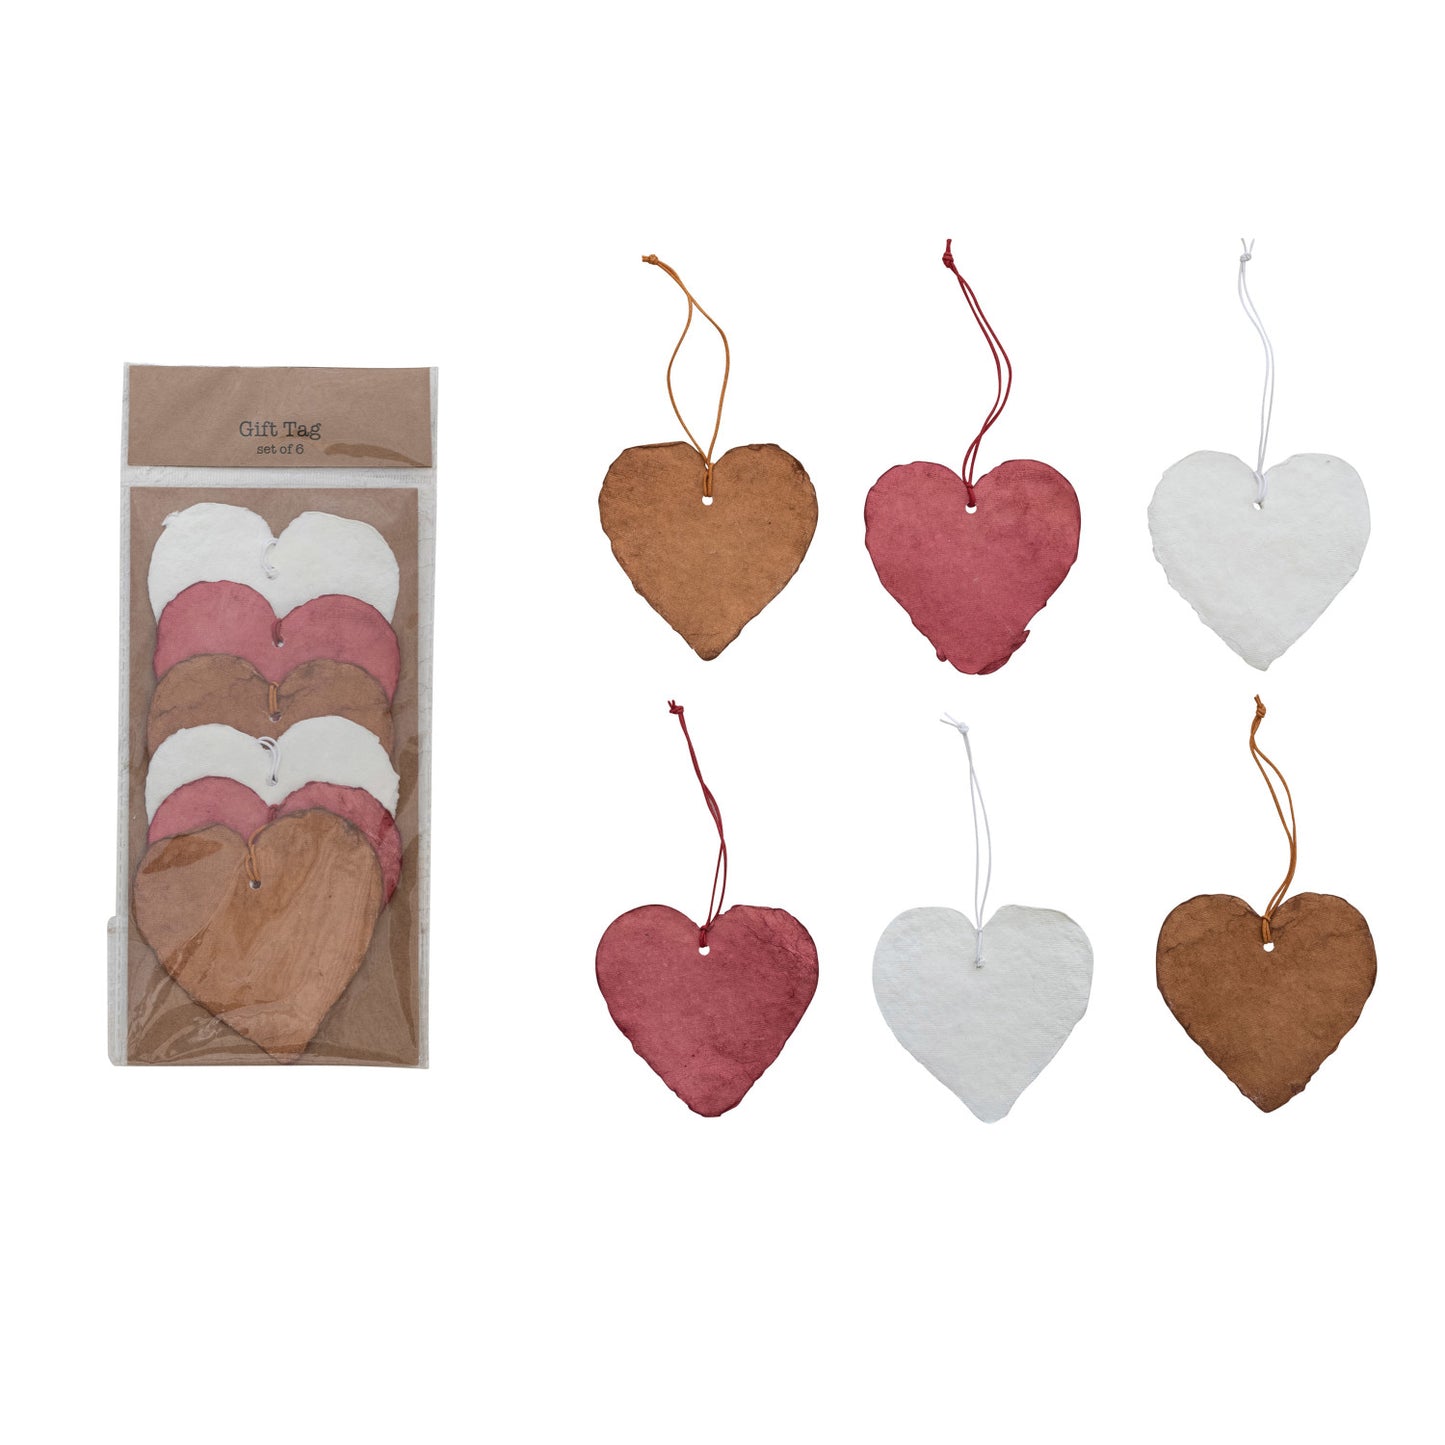 Handmade Recycled Paper Heart Gift Tags